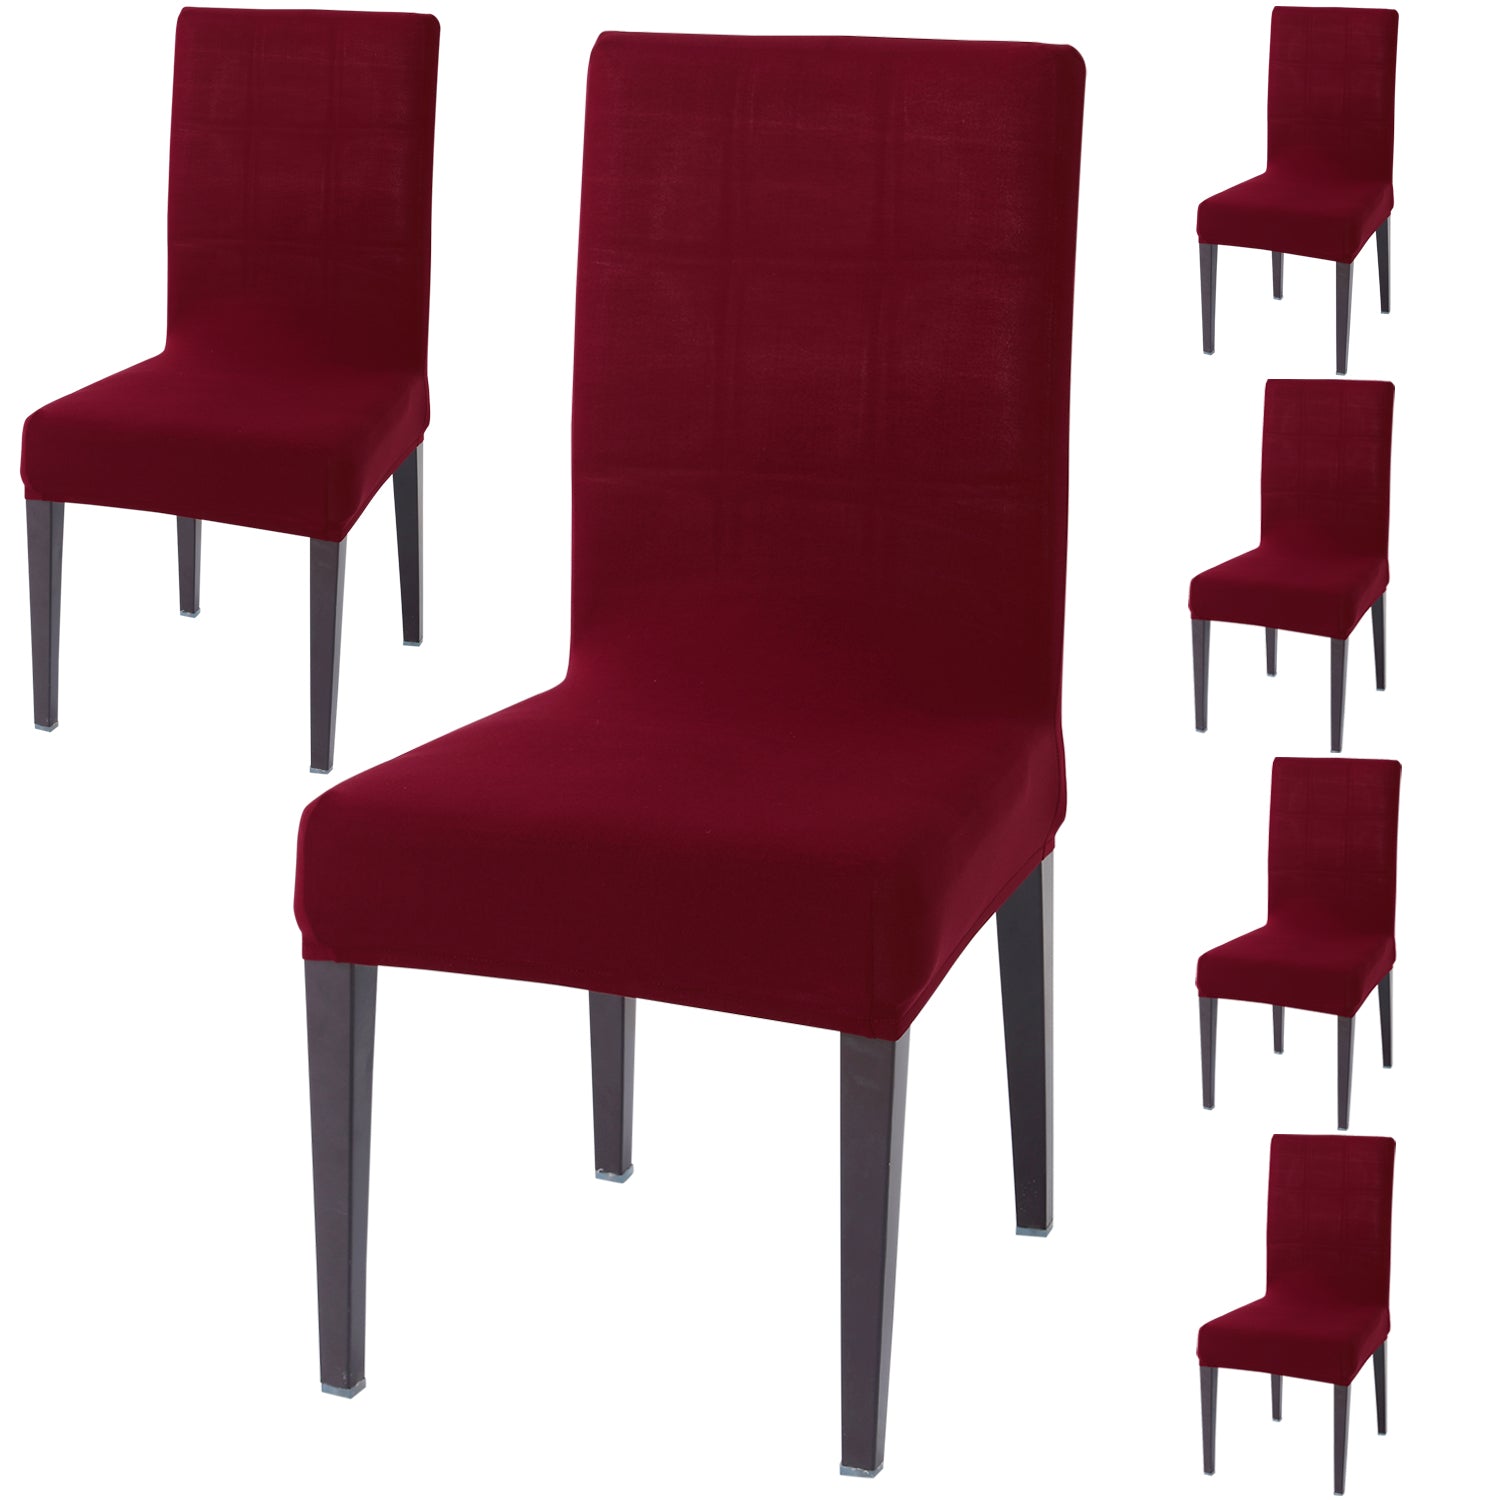 Elastic Stretchable Dining Chair Cover, Maroon